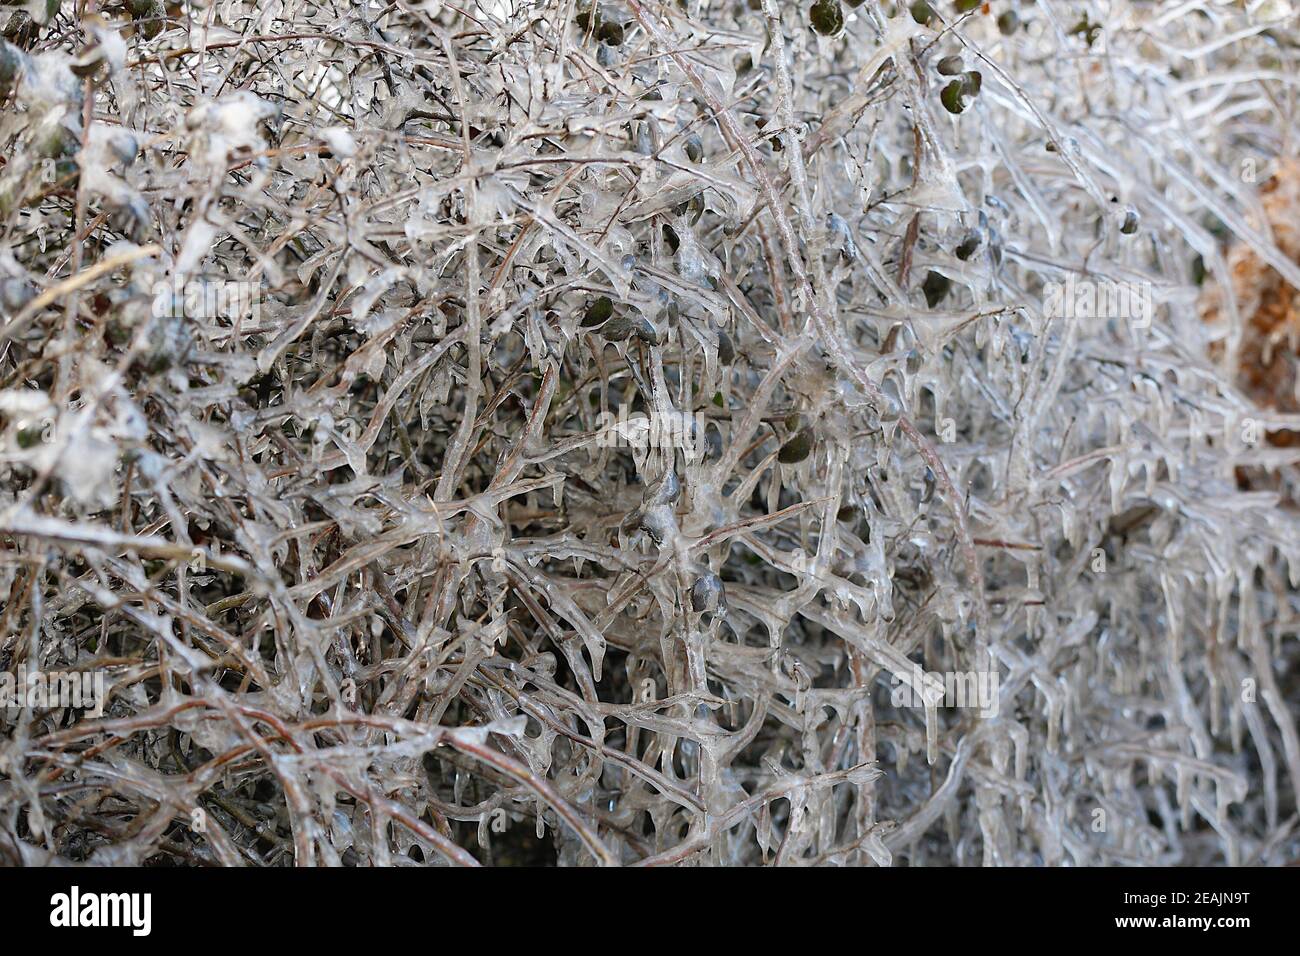 Ashford, Kent, UK. 10 Feb, 2021. UK Weather: In the middle of Storm Darcy amazing roadside icicles form on hedgerows on the A28 Ashford road between Bethersden and High Halden  in Kent. Photo Credit: Paul Lawrenson/Alamy Live News Stock Photo